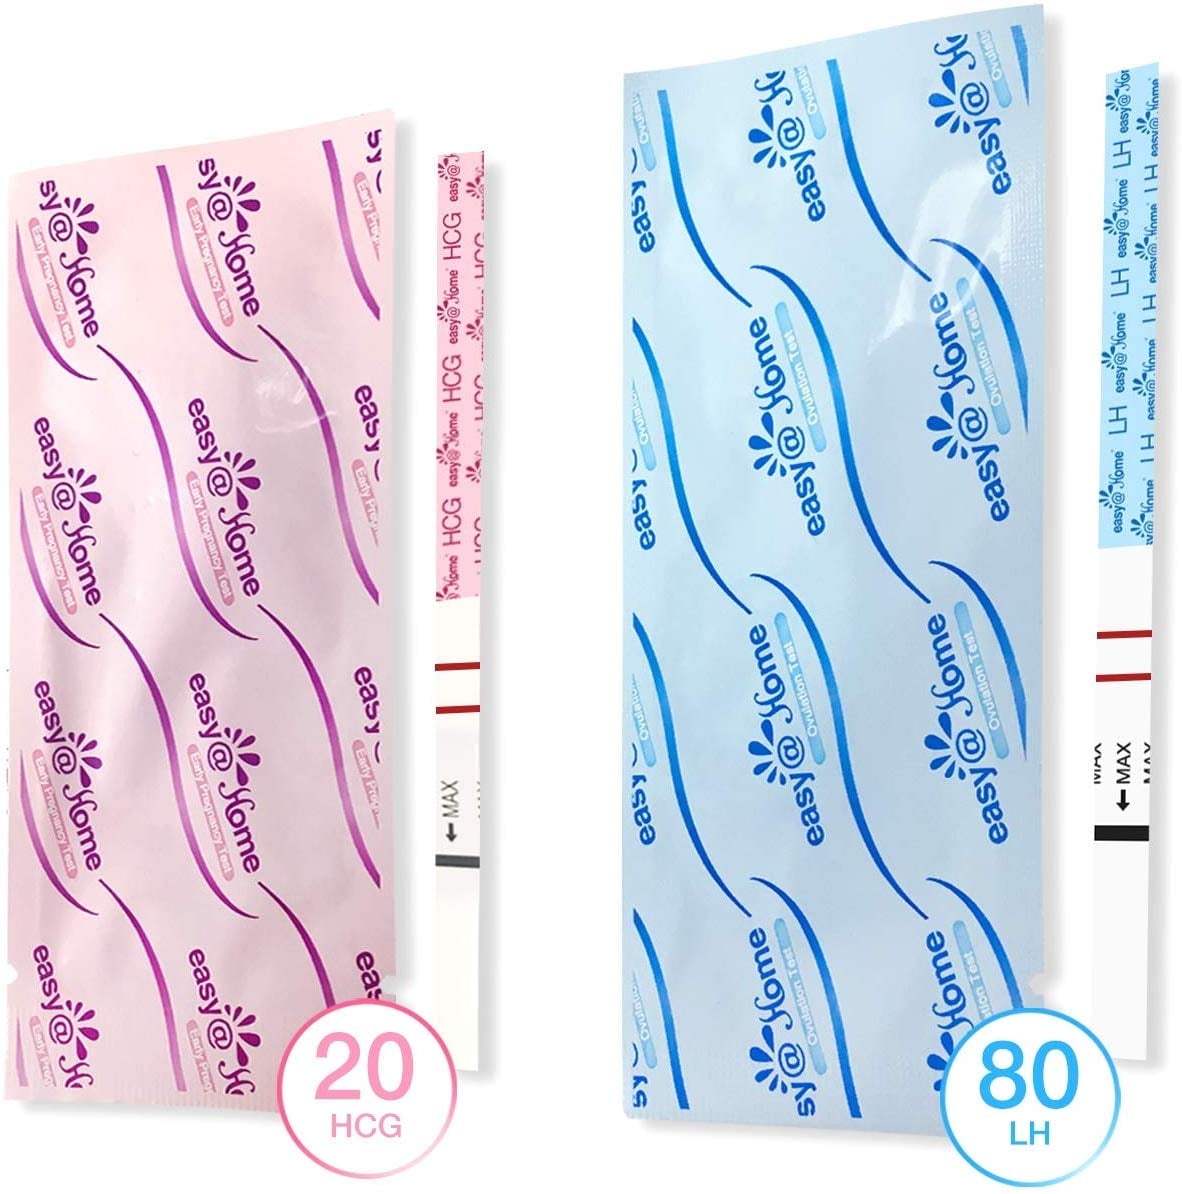 Easyhome 80 Ovulation Lh And 20 Pregnancy Hcg Combo Urine Test Strips Kit Powered By 1972